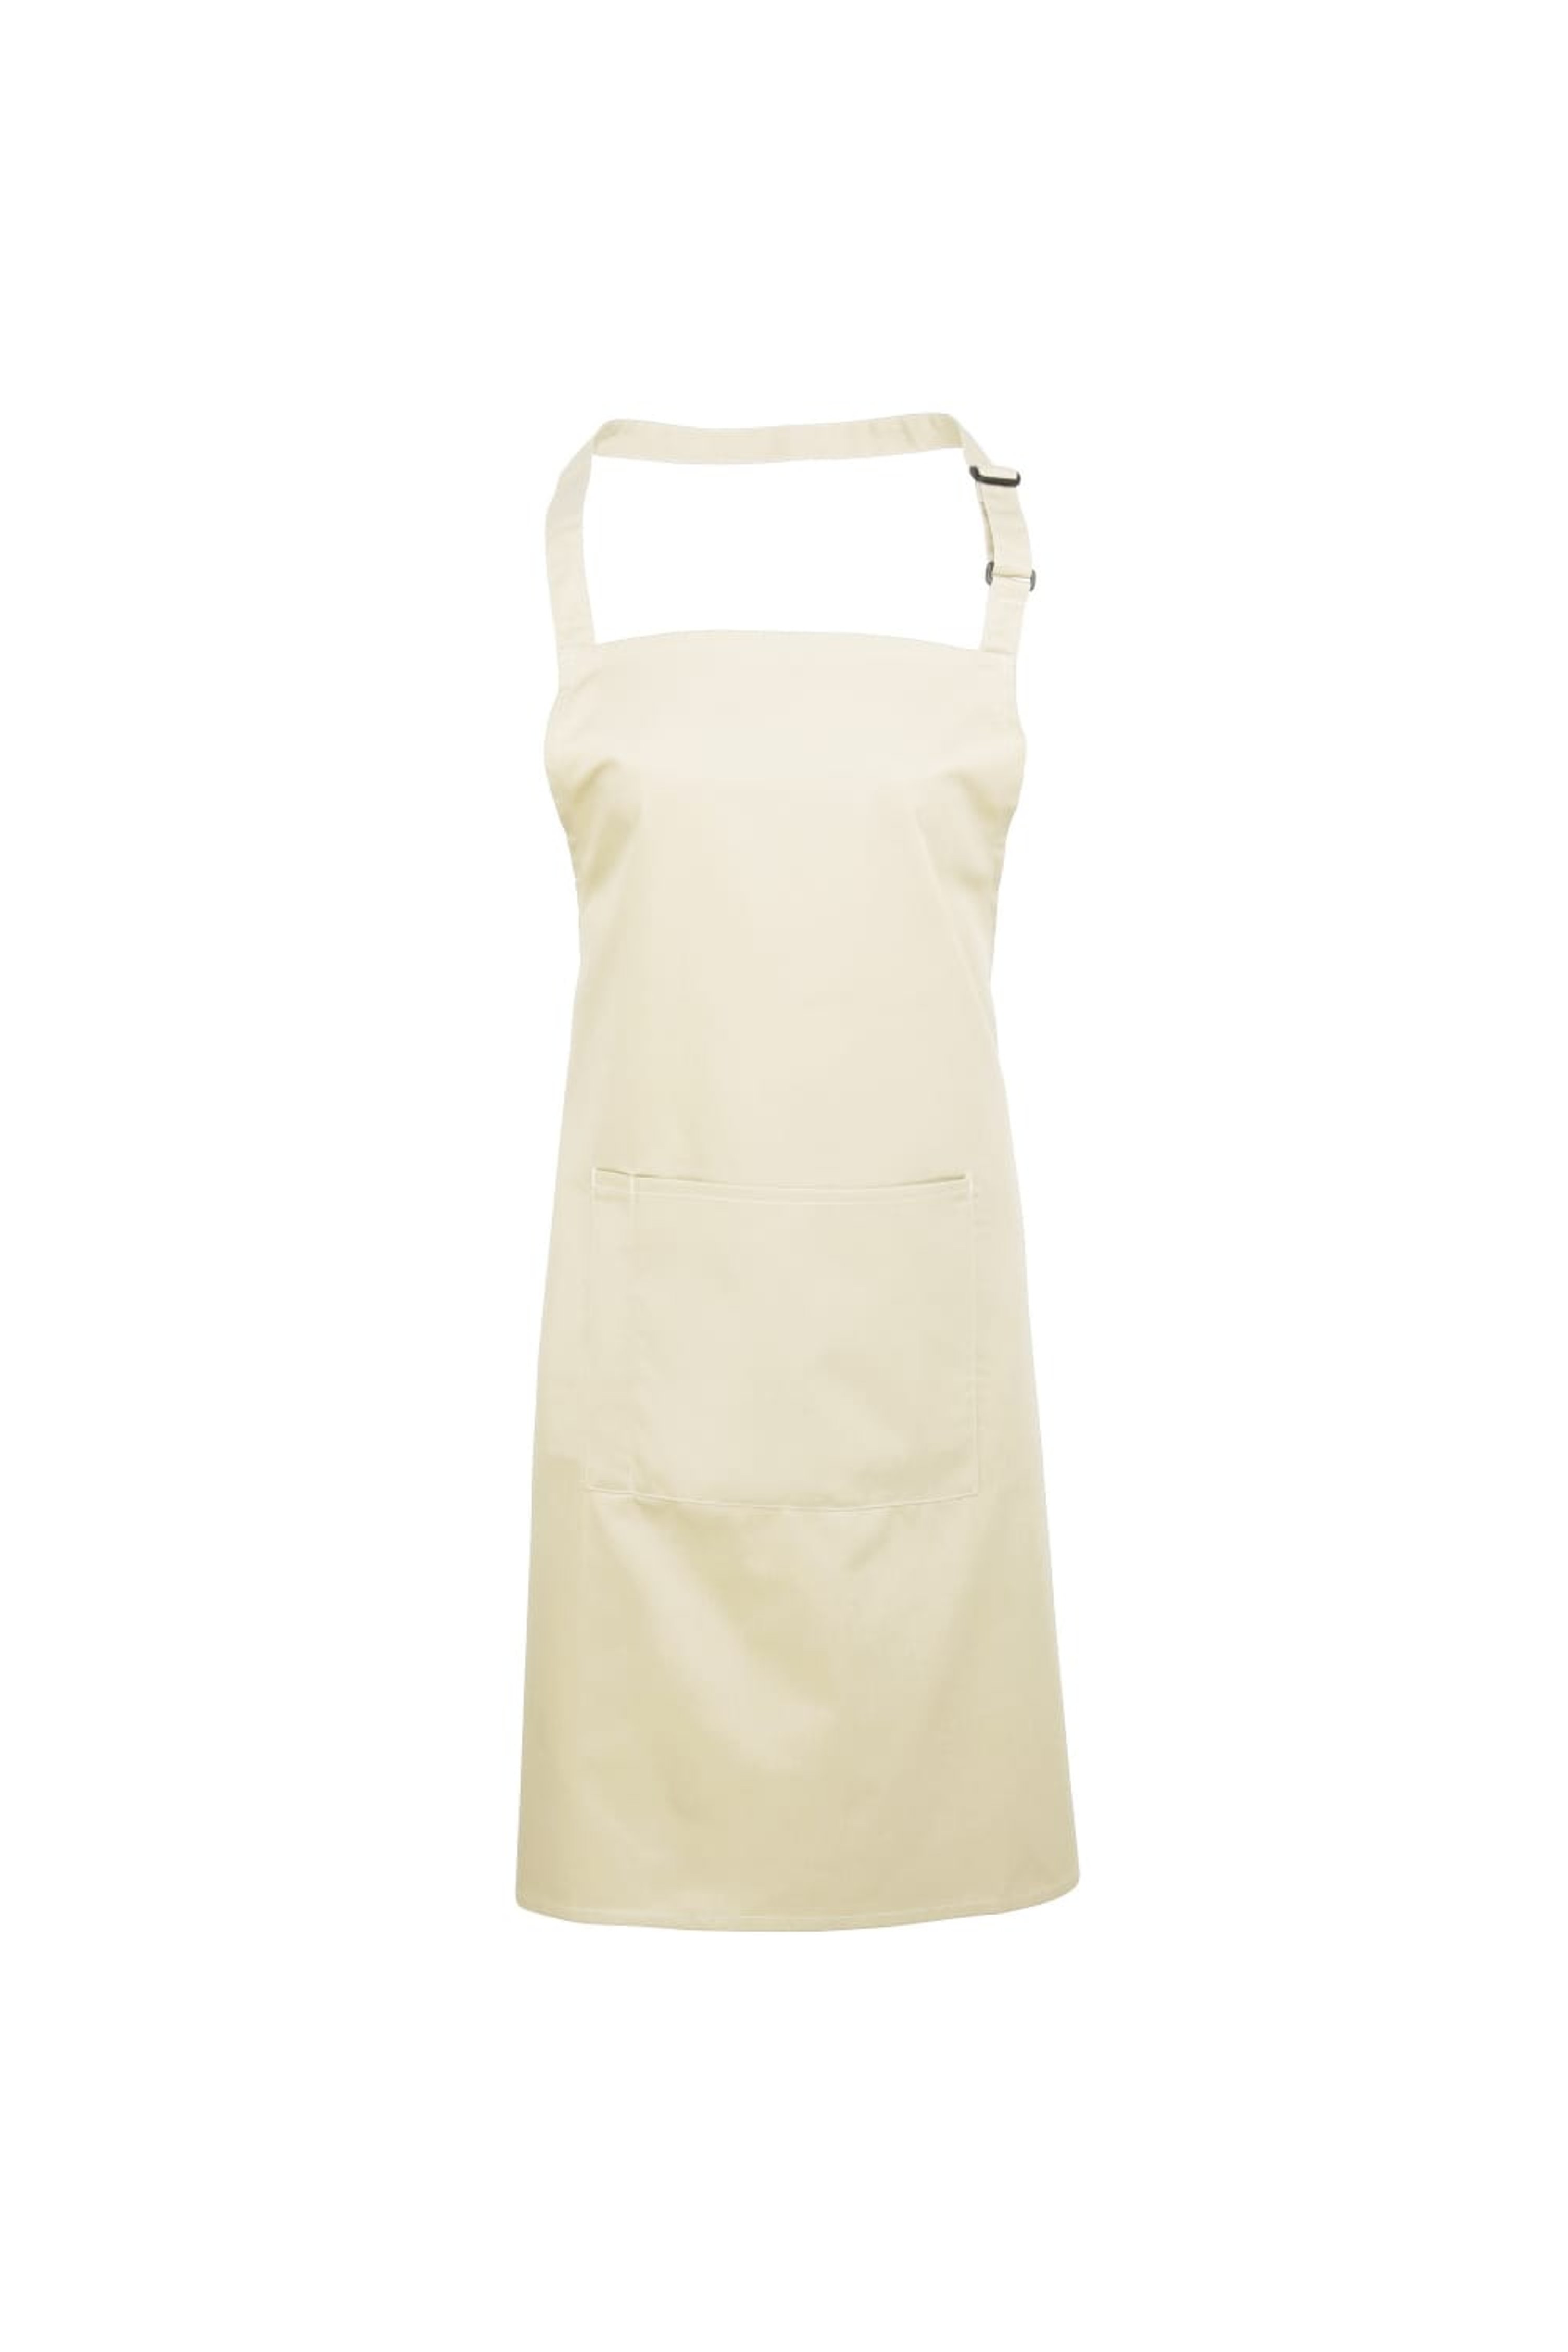 PREMIER PREMIER LADIES/WOMENS COLOURS BIP APRON WITH POCKET / WORKWEAR (PACK OF 2) (NATURAL) (ONE SIZE)